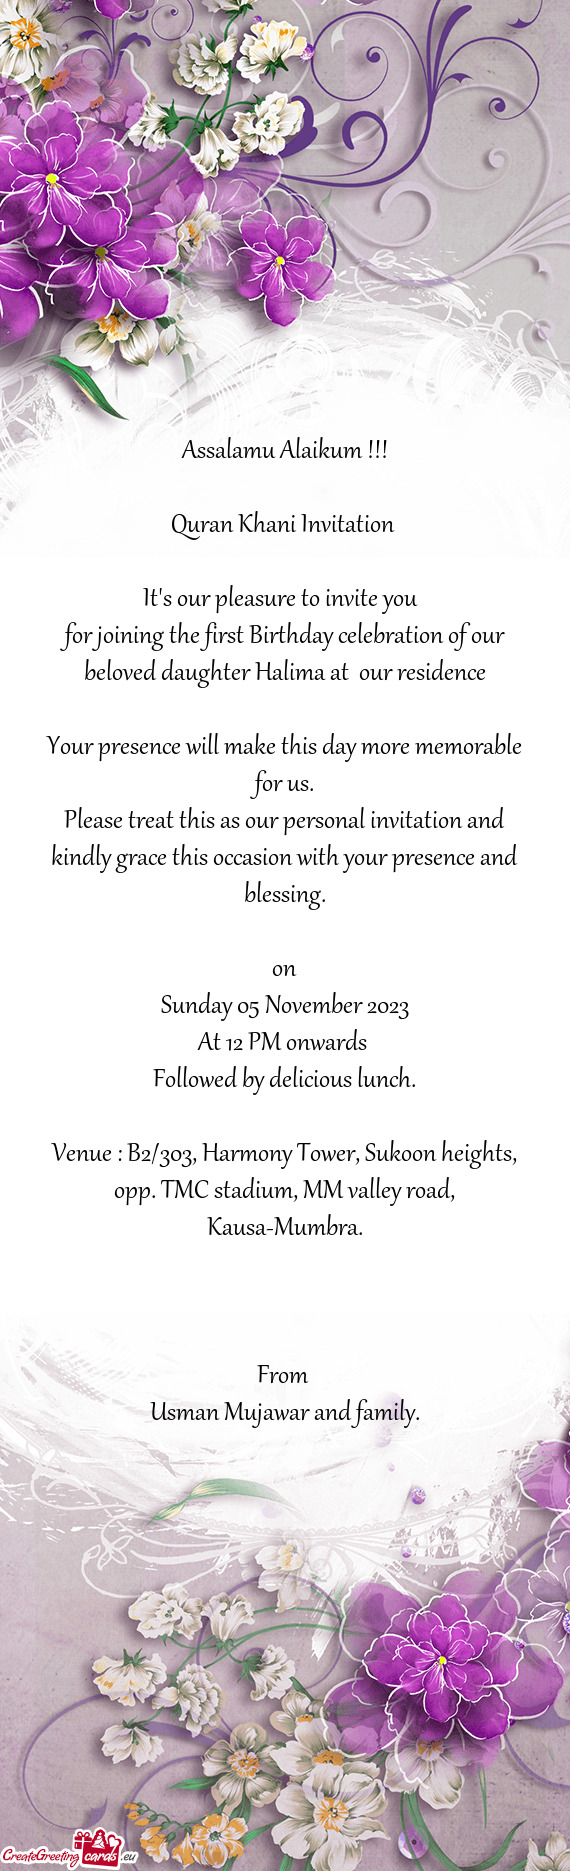 For joining the first Birthday celebration of our beloved daughter Halima at our residence